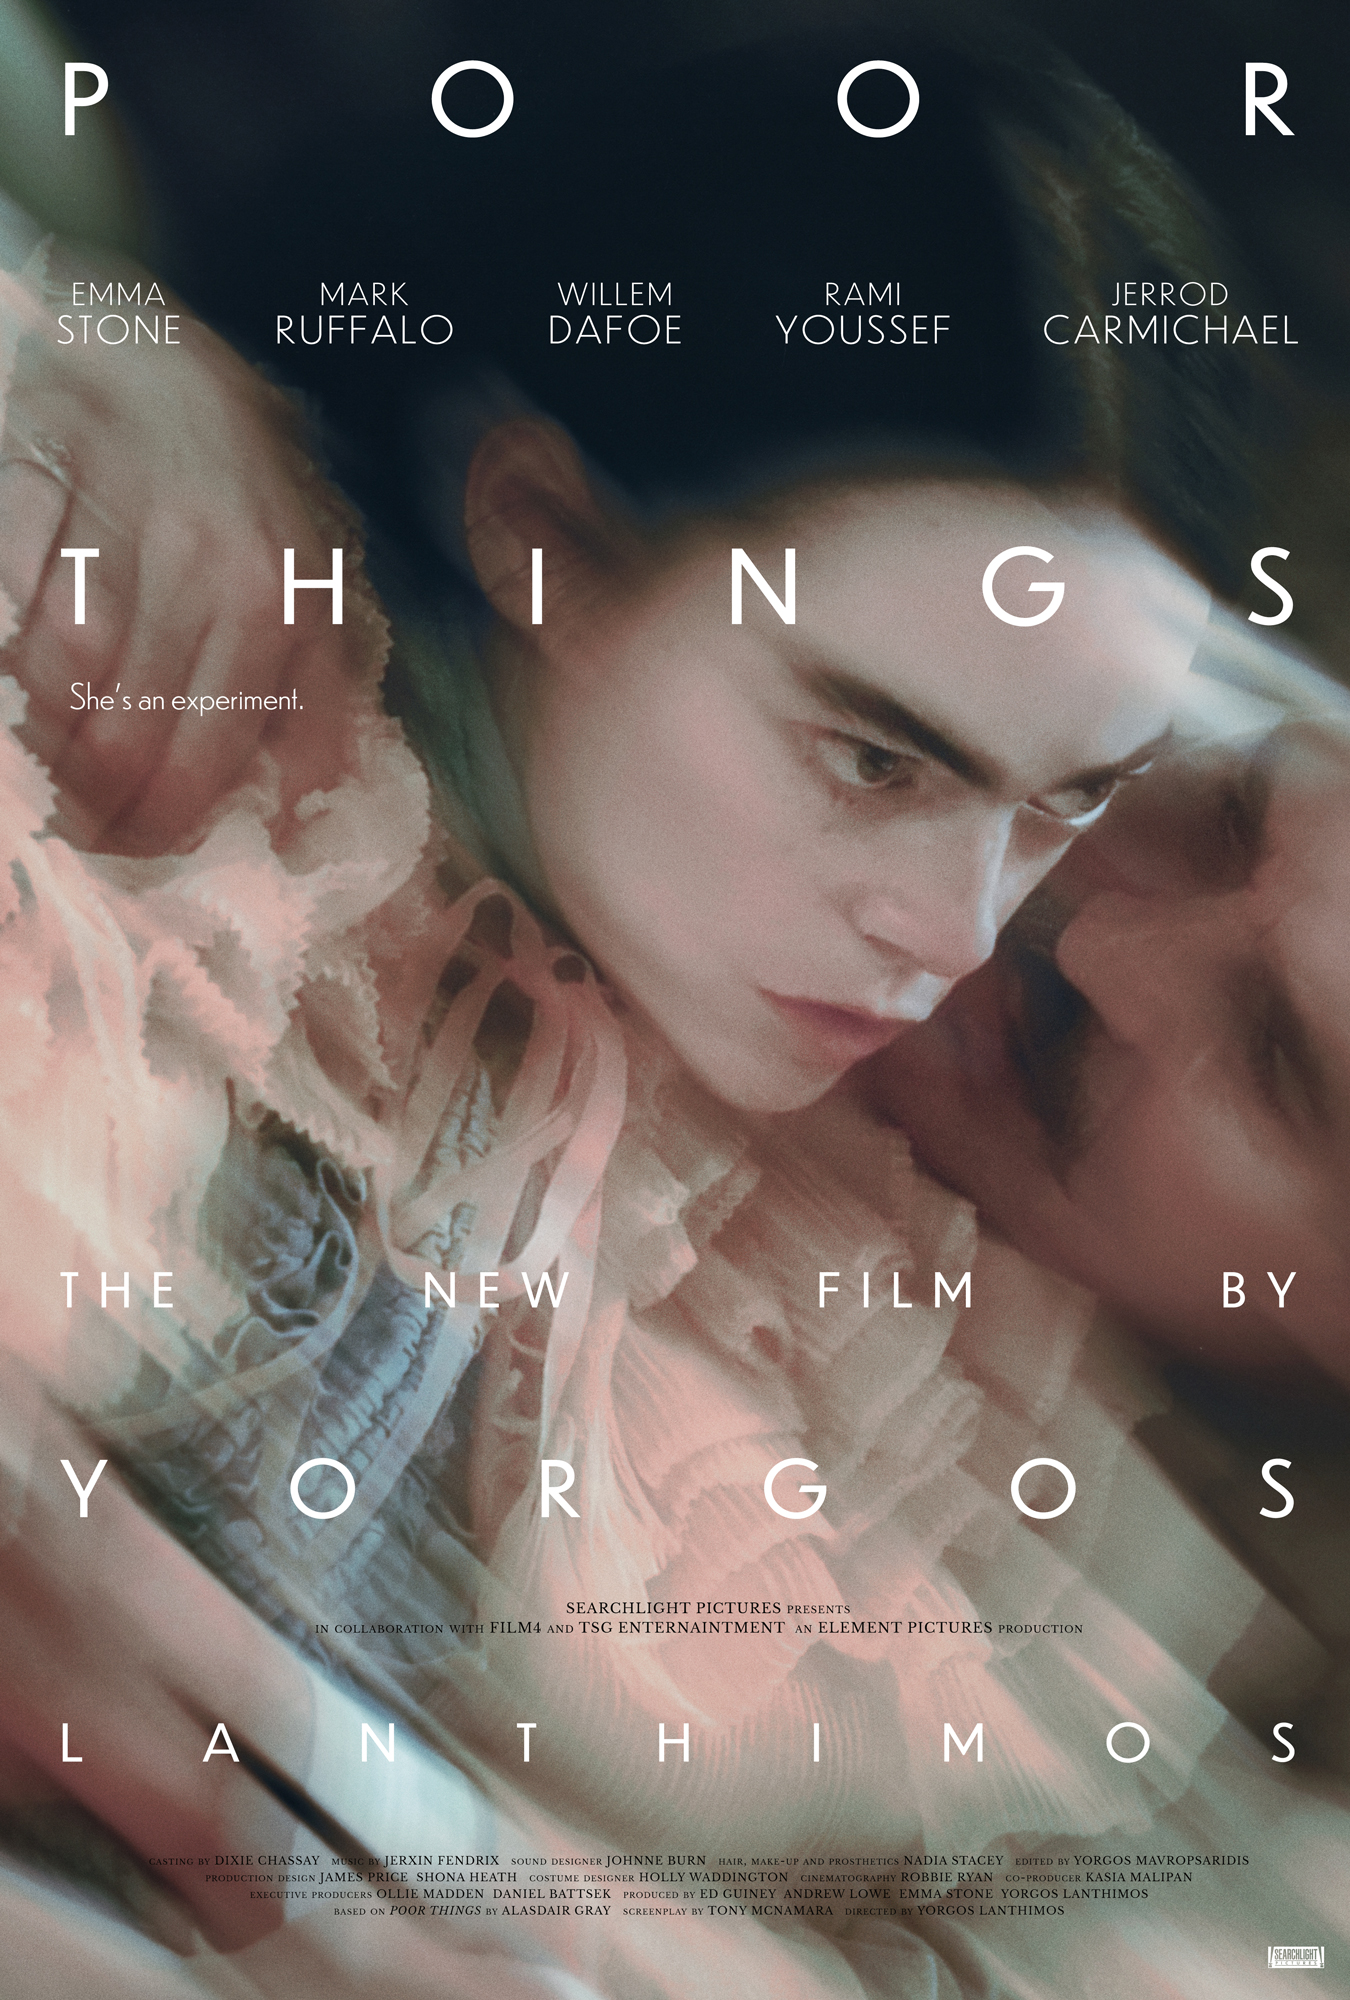 Second Trailer for Yorgos Lanthimos' Poor Things Conjures a Strange World